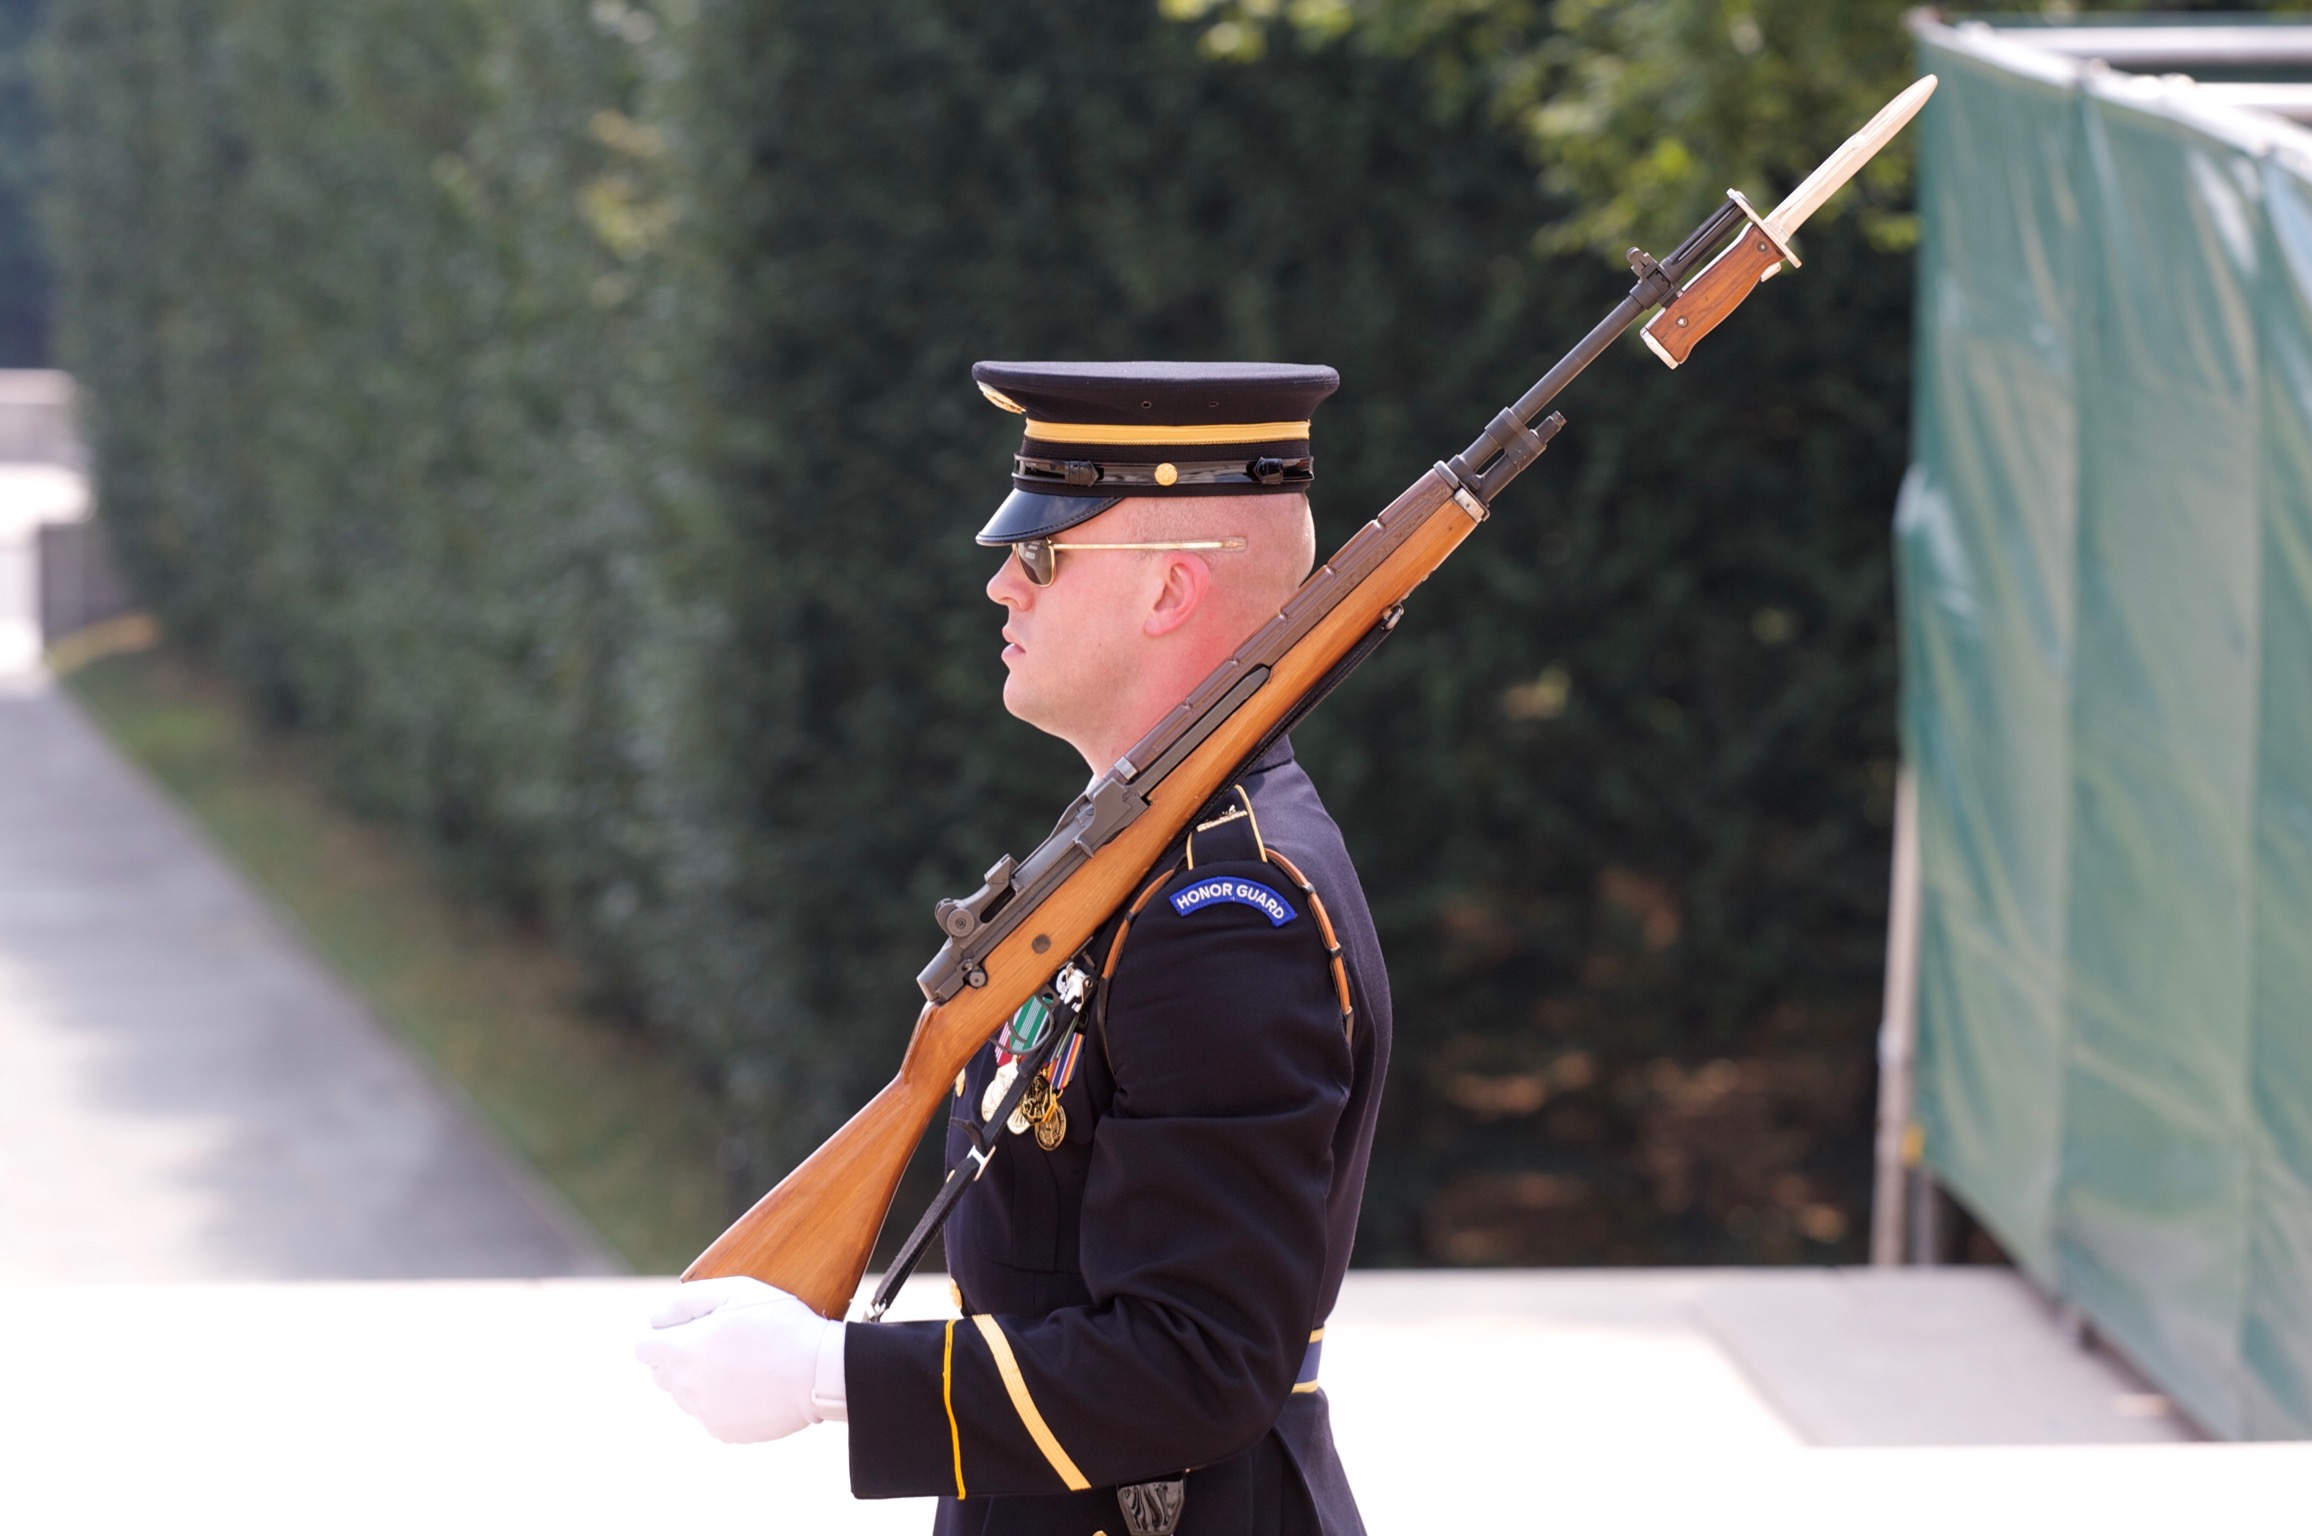 Arlington, tomb of the unknown soldier...